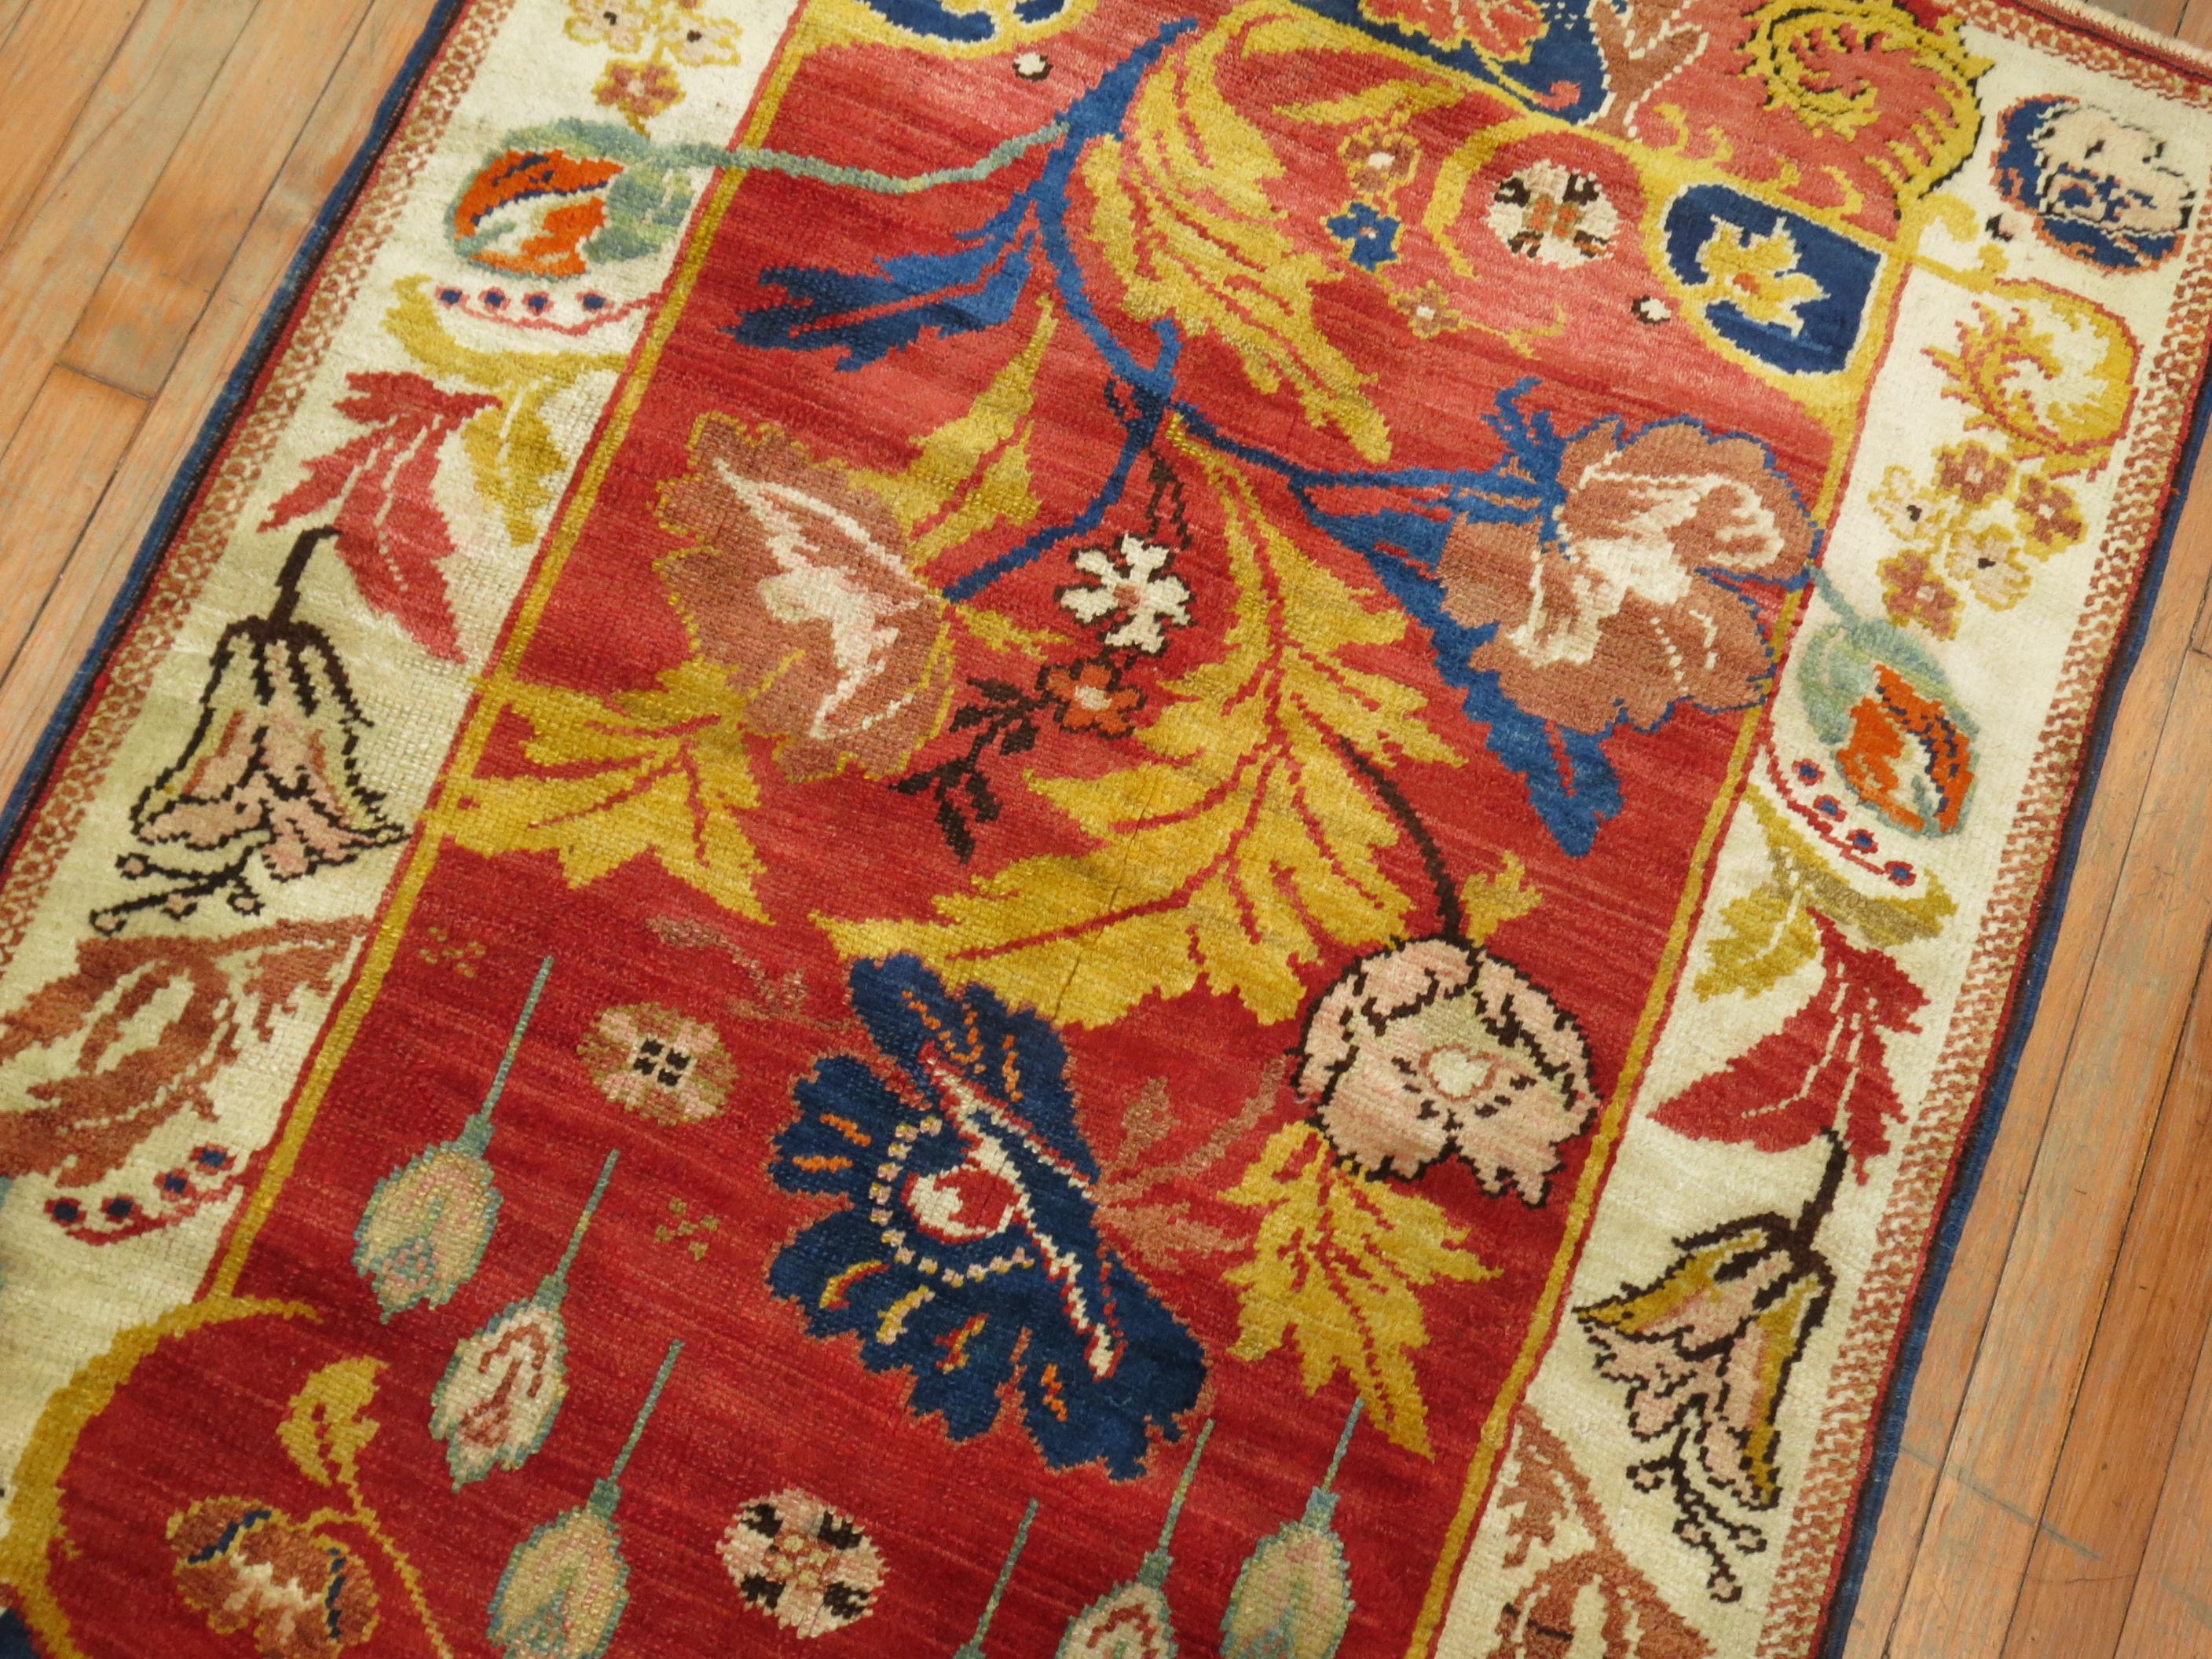 A mid-20th century Turkish scatter size rug purchased from a upper east side penthouse in Manhattan. The piece was ordered back in 1948 by a couple for their master bedroom. In excellent shape.

Measures: 3'5